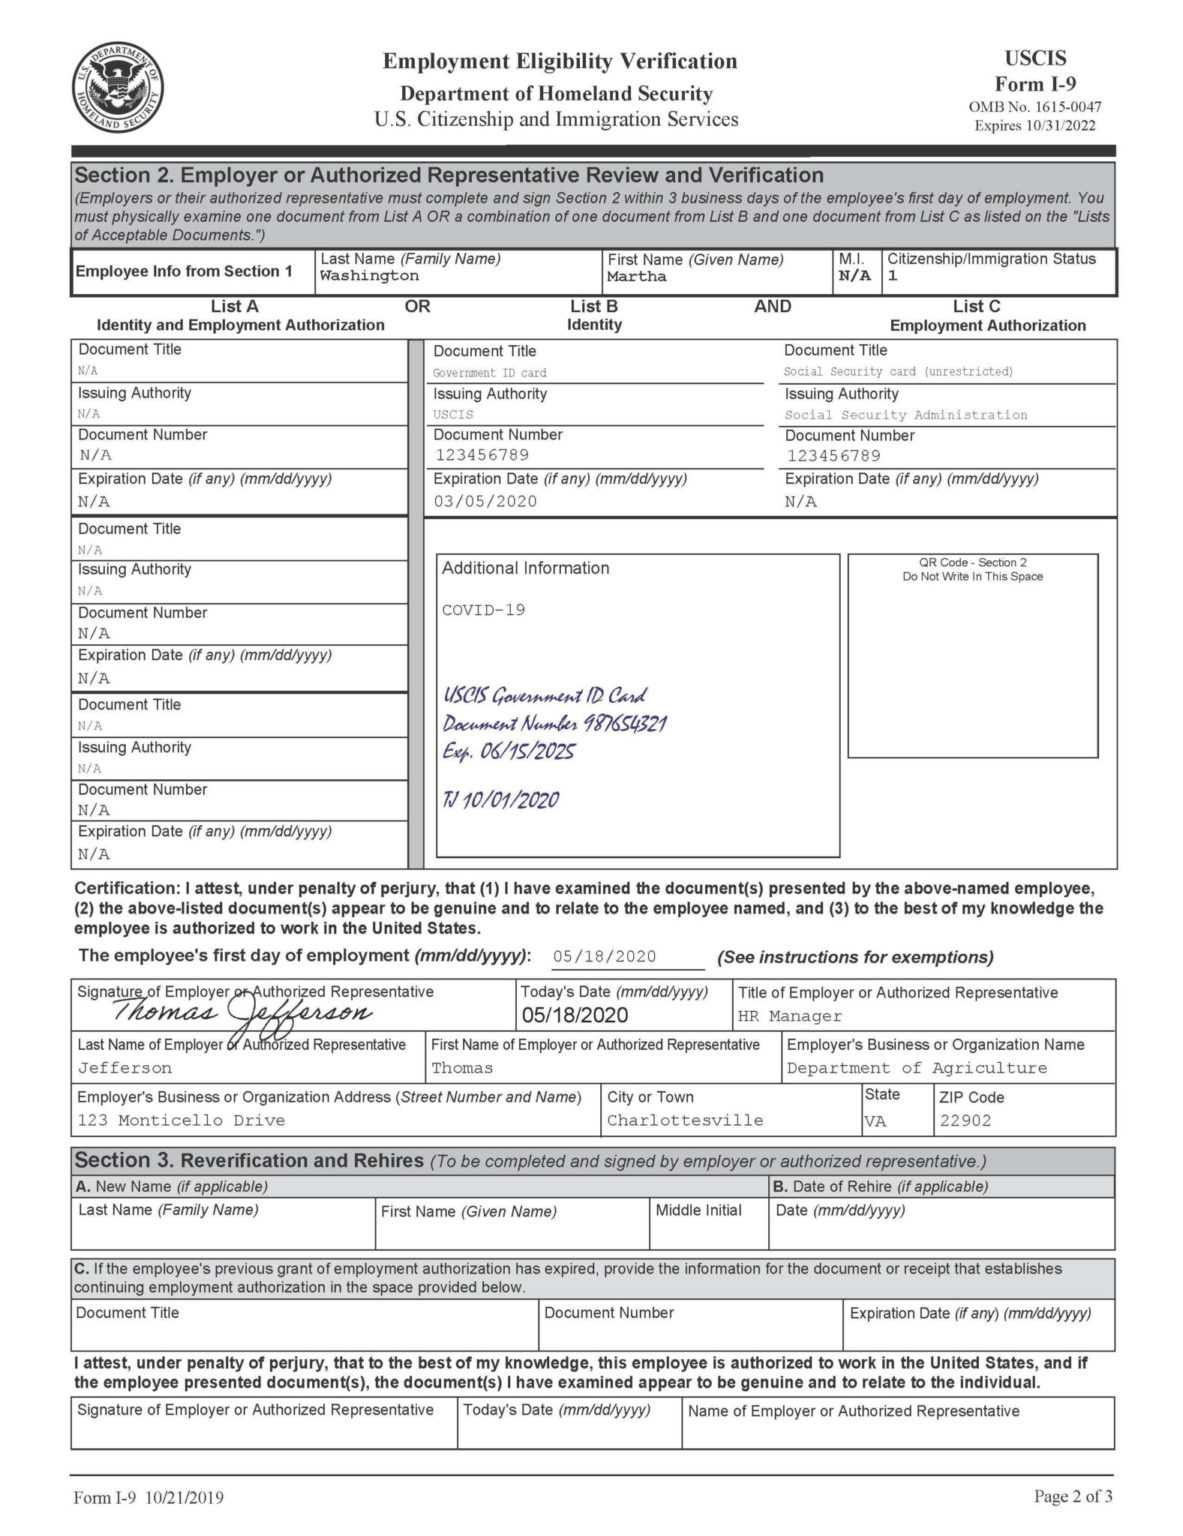 government-form-i-9-printable-version-printable-forms-free-online